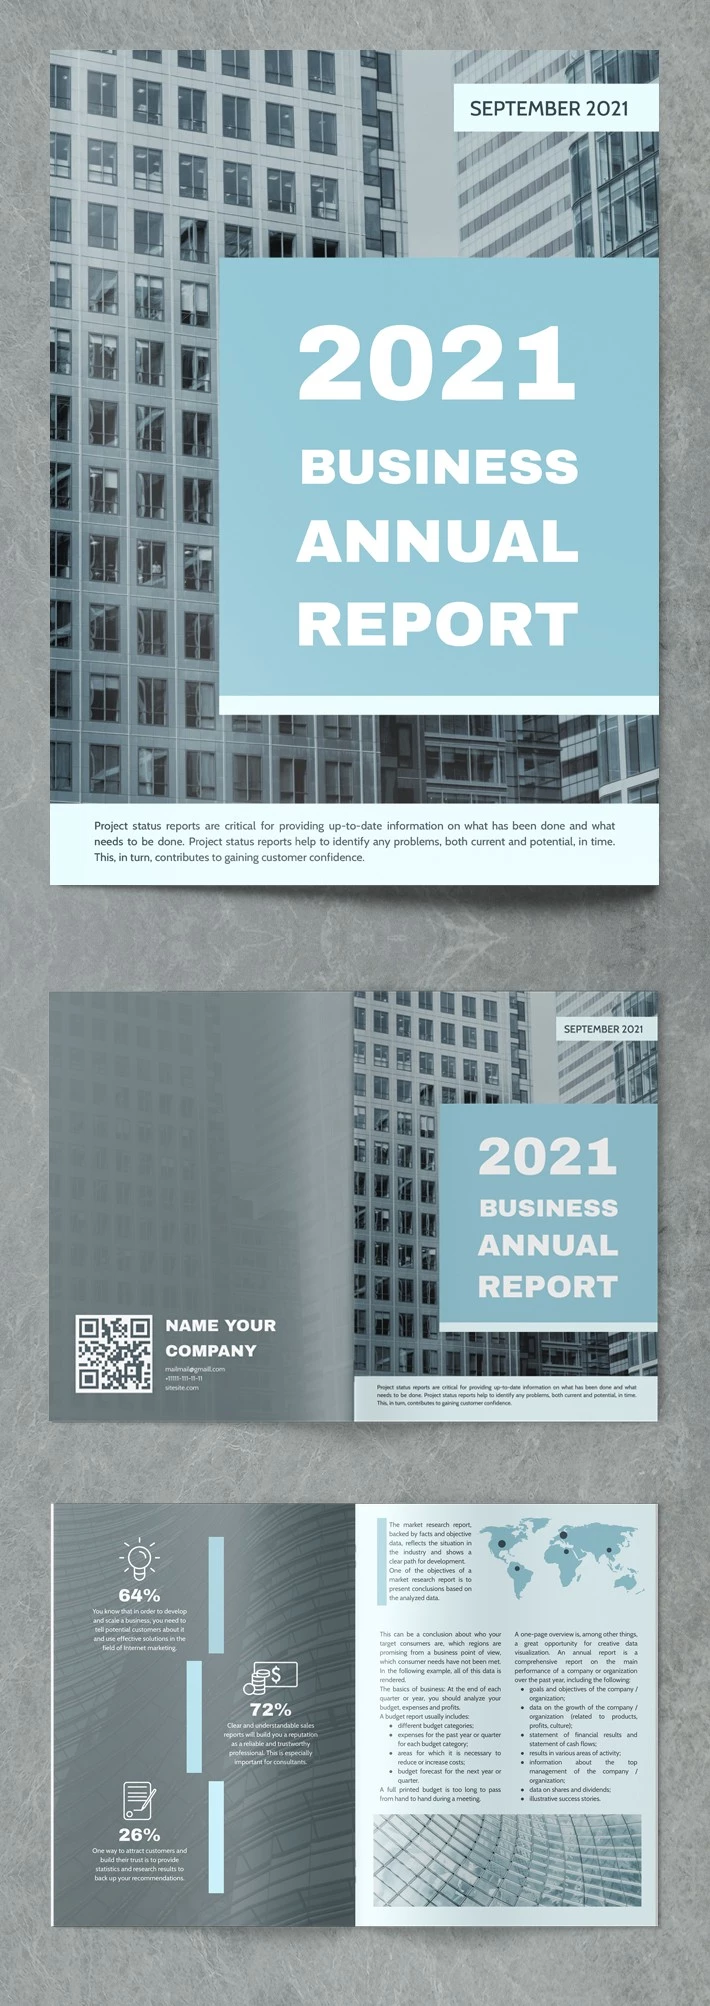 Perfect Business Annual Report - free Google Docs Template - 10061901